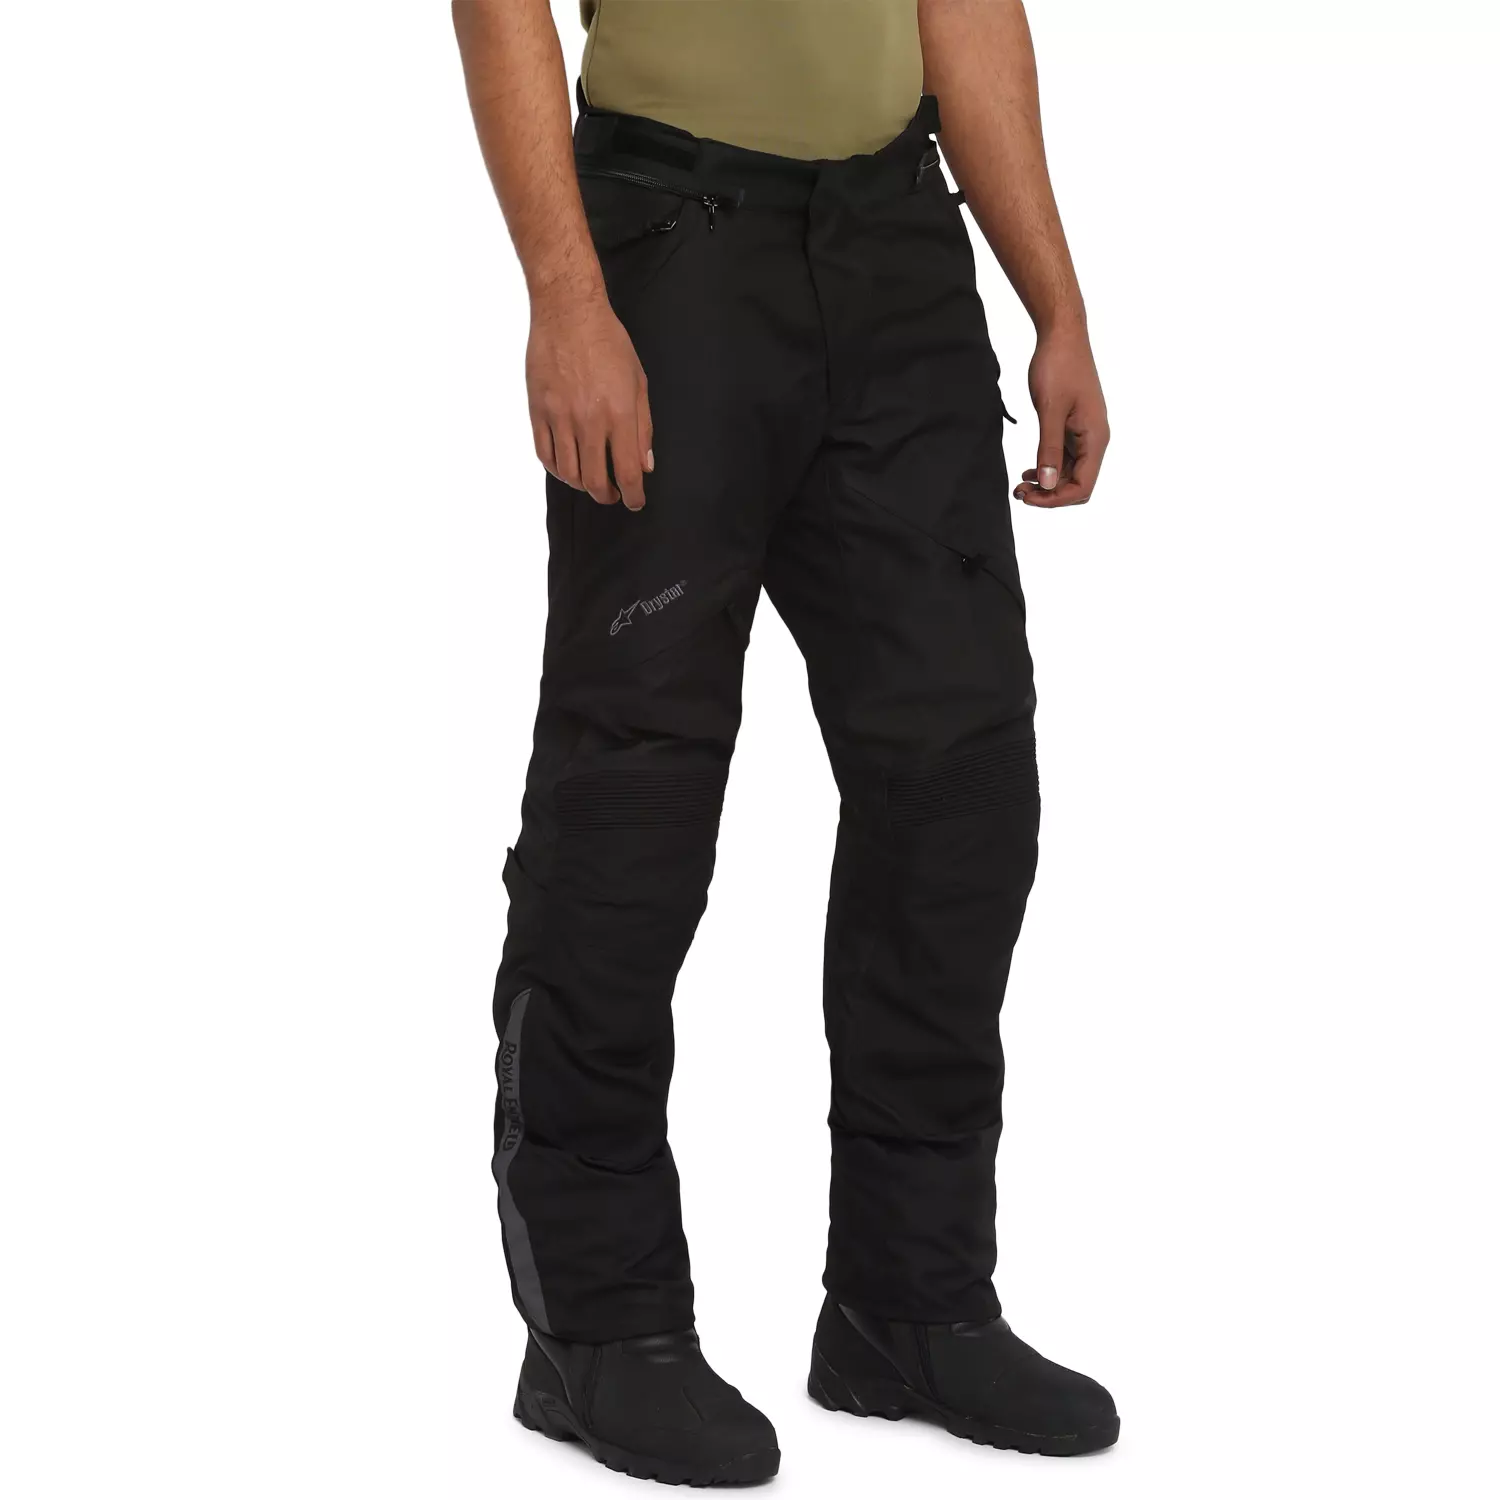 Royal Enfield Men's Universal Fit Trousers Riding (RLATRP000003_Black &  Grey_34) : Amazon.in: Clothing & Accessories